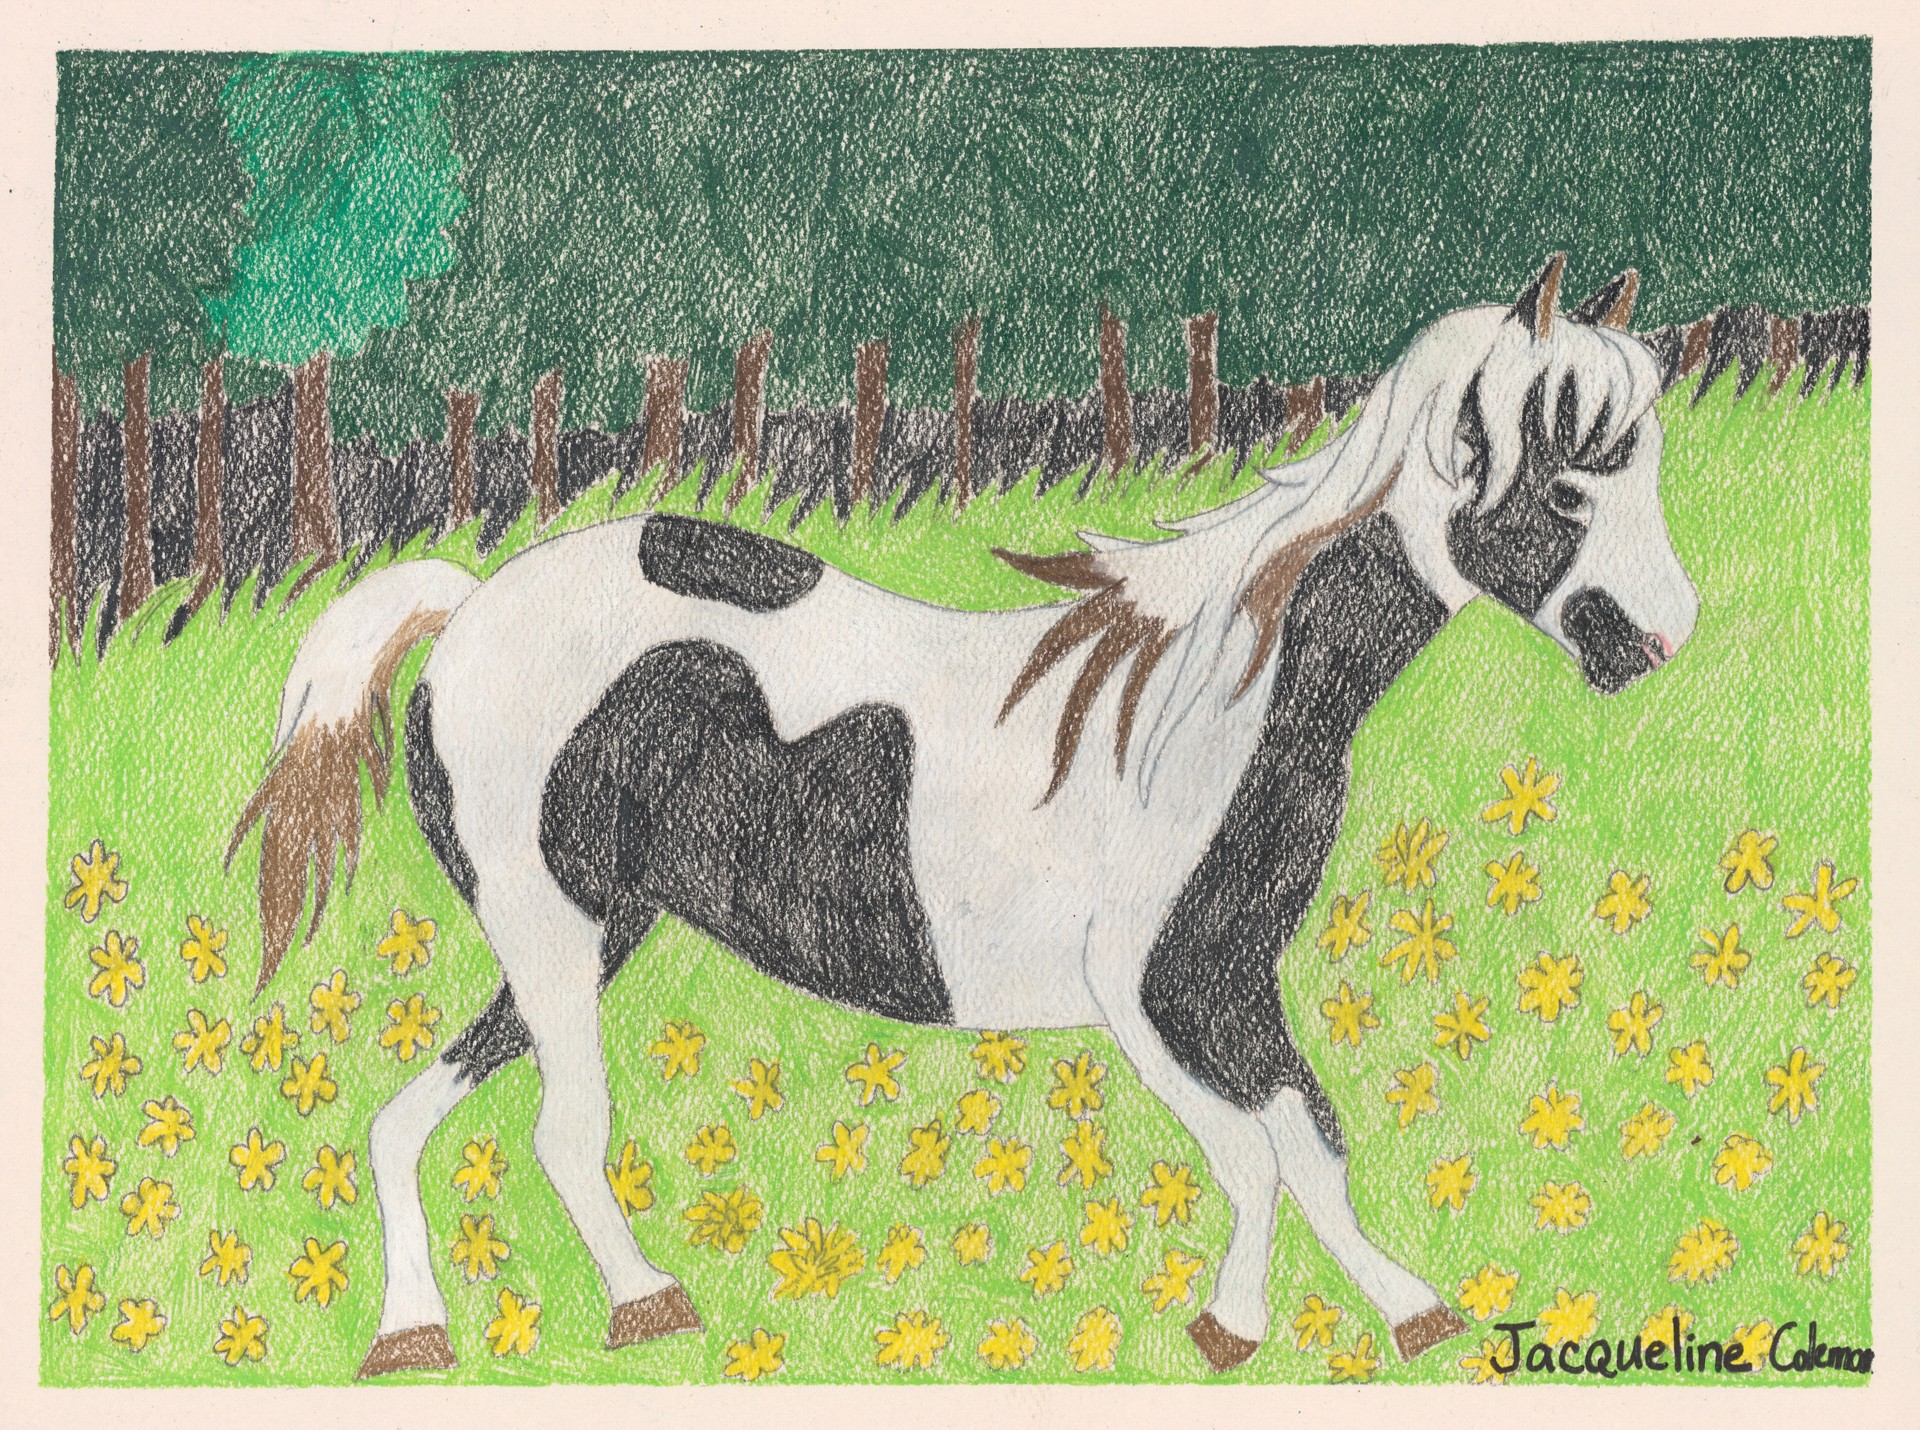 Horse Running in the Yard by Jacqueline Coleman